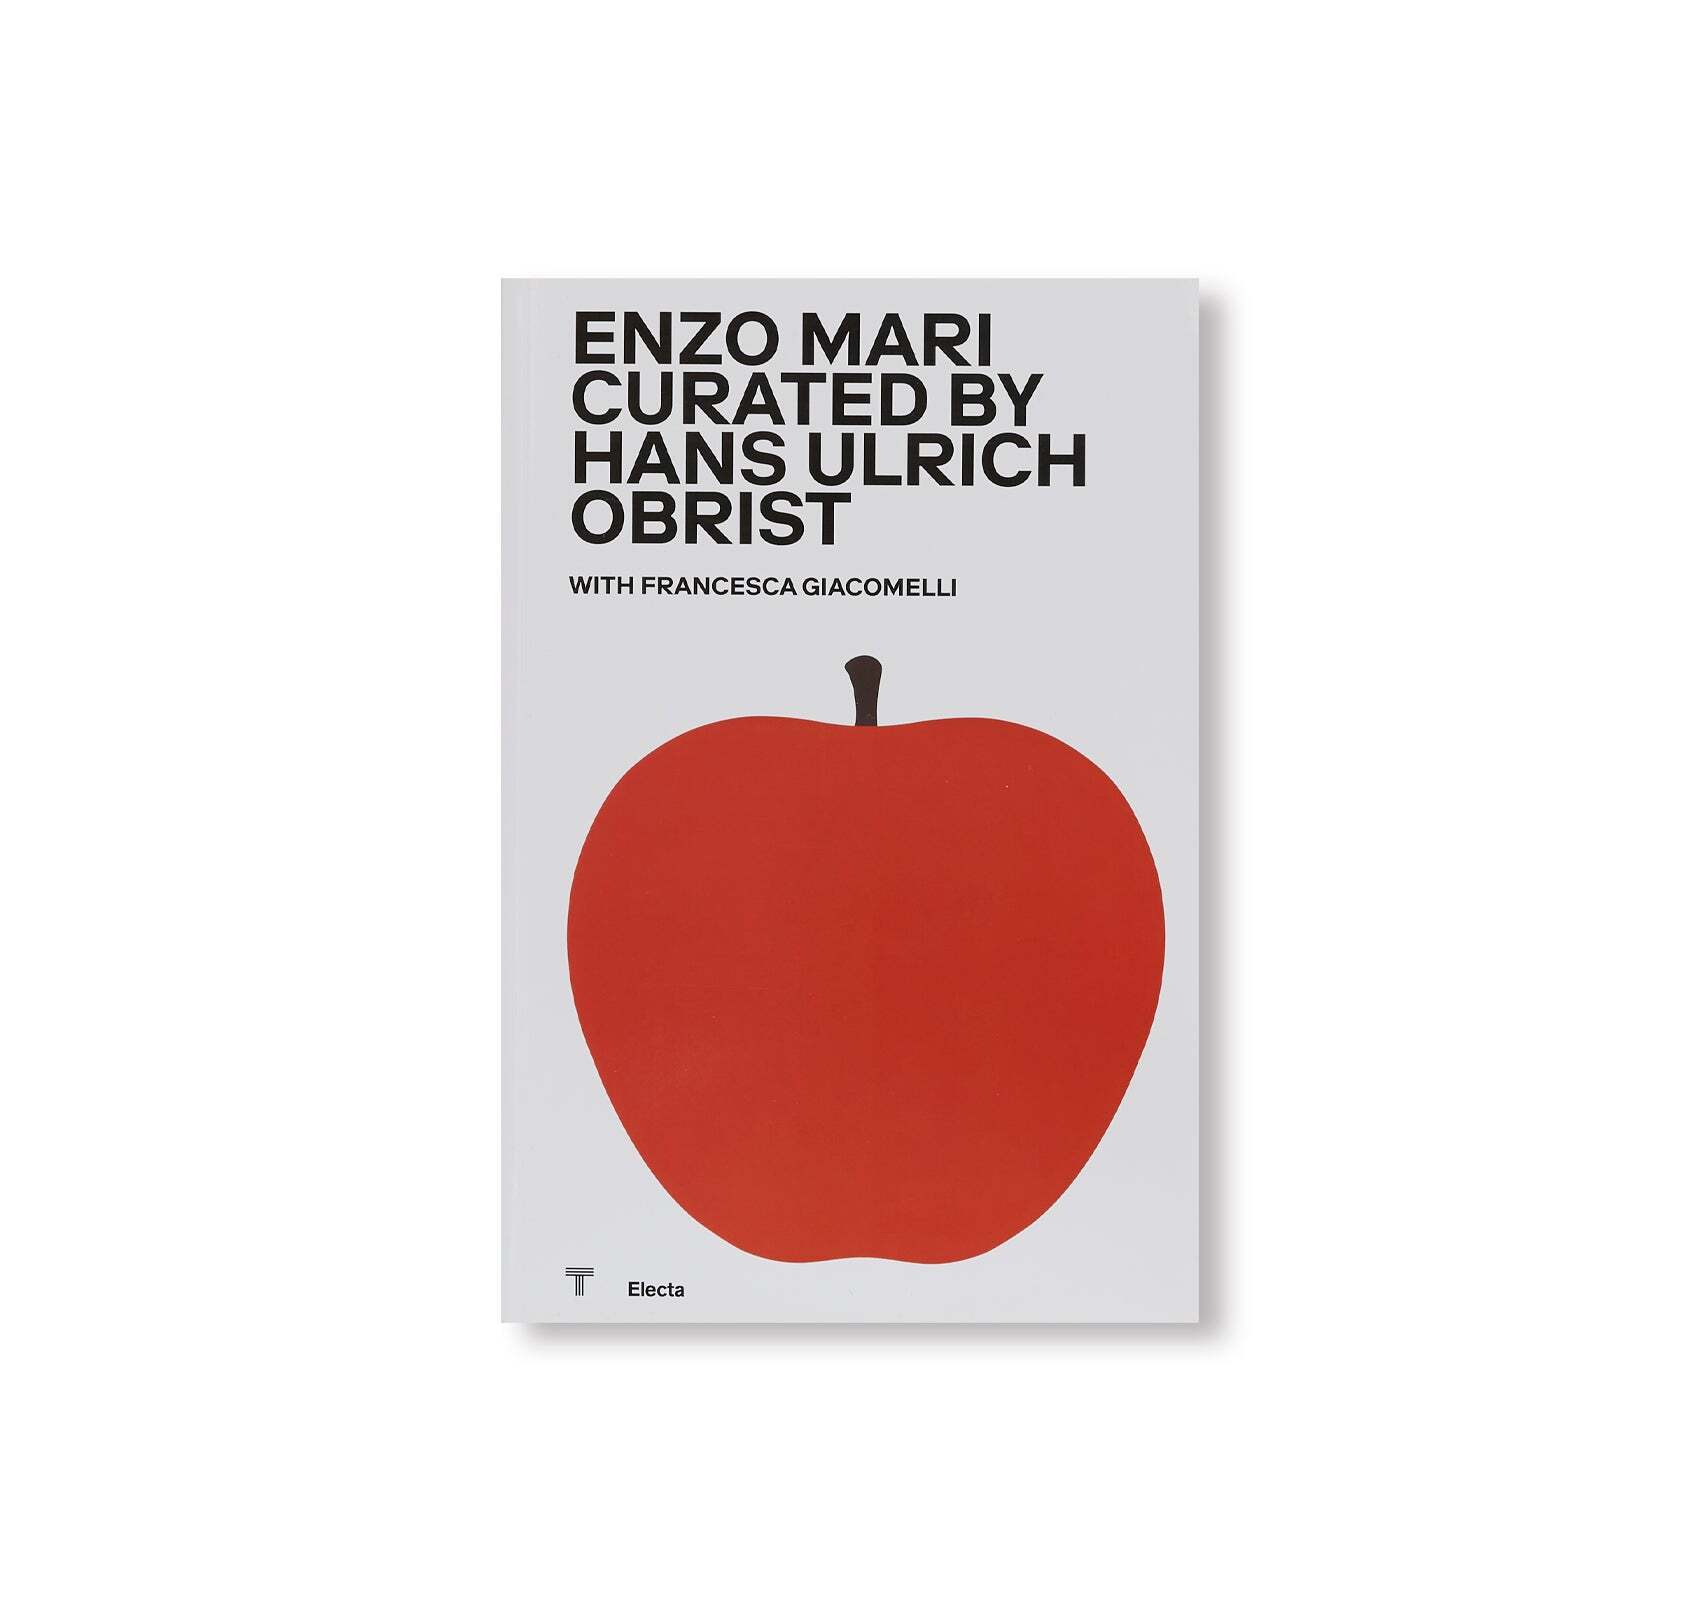 BOOK / ENZO MARI CURATED BY HANS ULRICH OBRIST